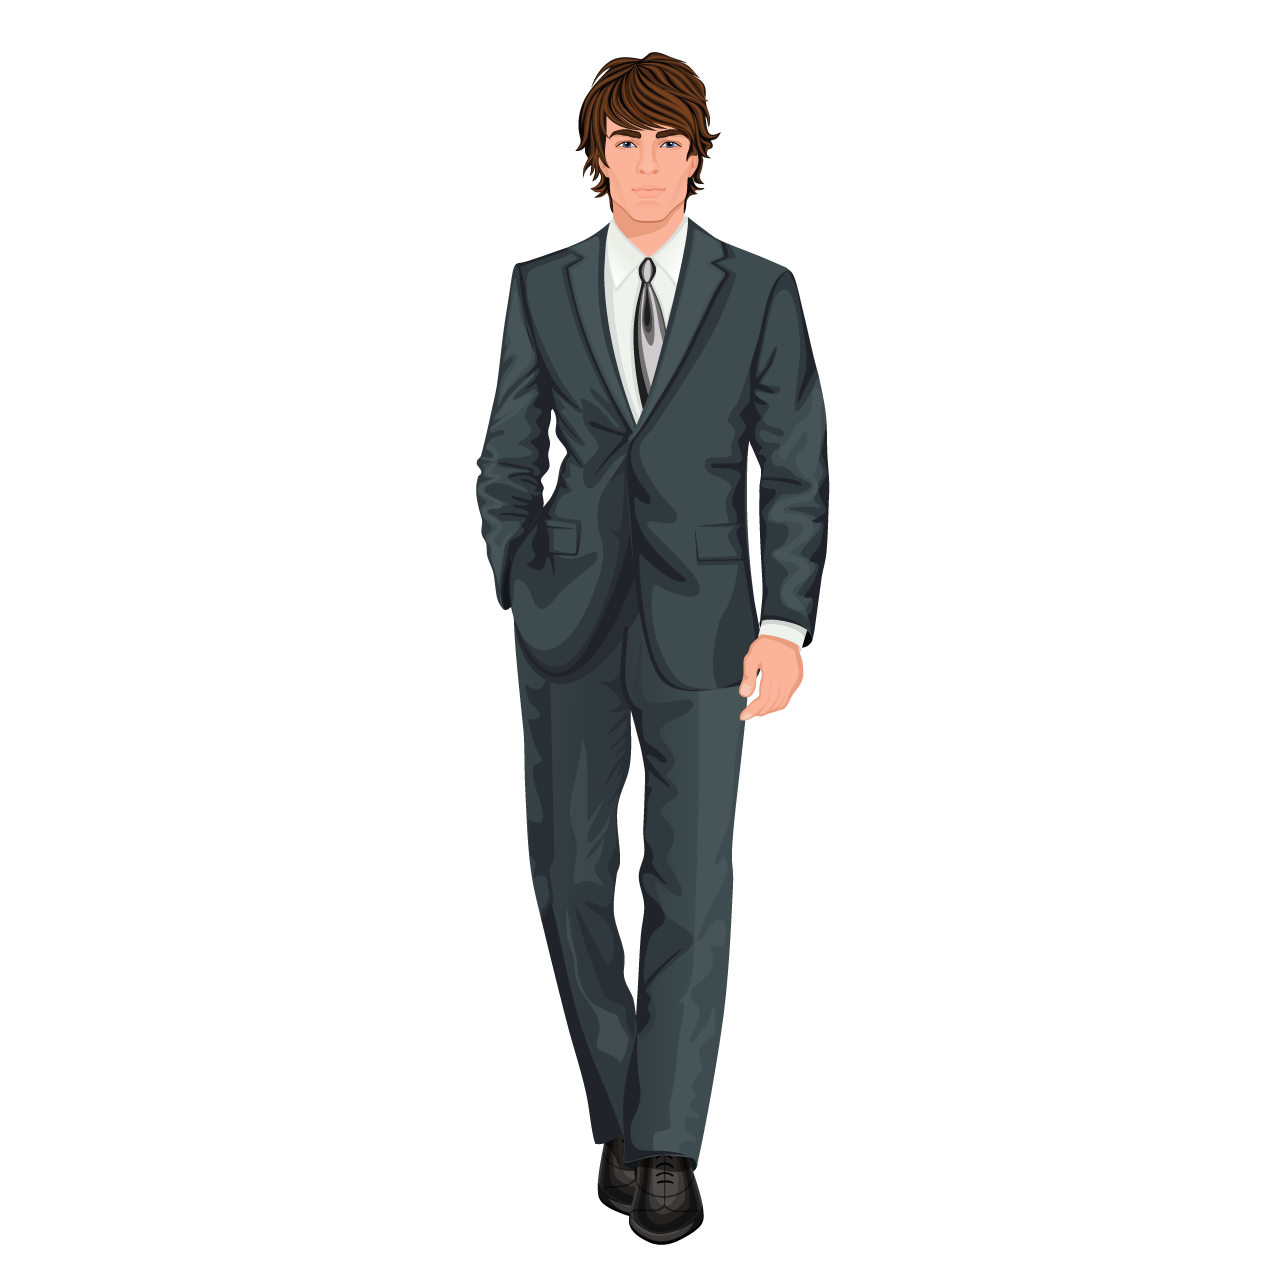 Businessman clipart young businessman standing character cartoon image hand drawing sketch